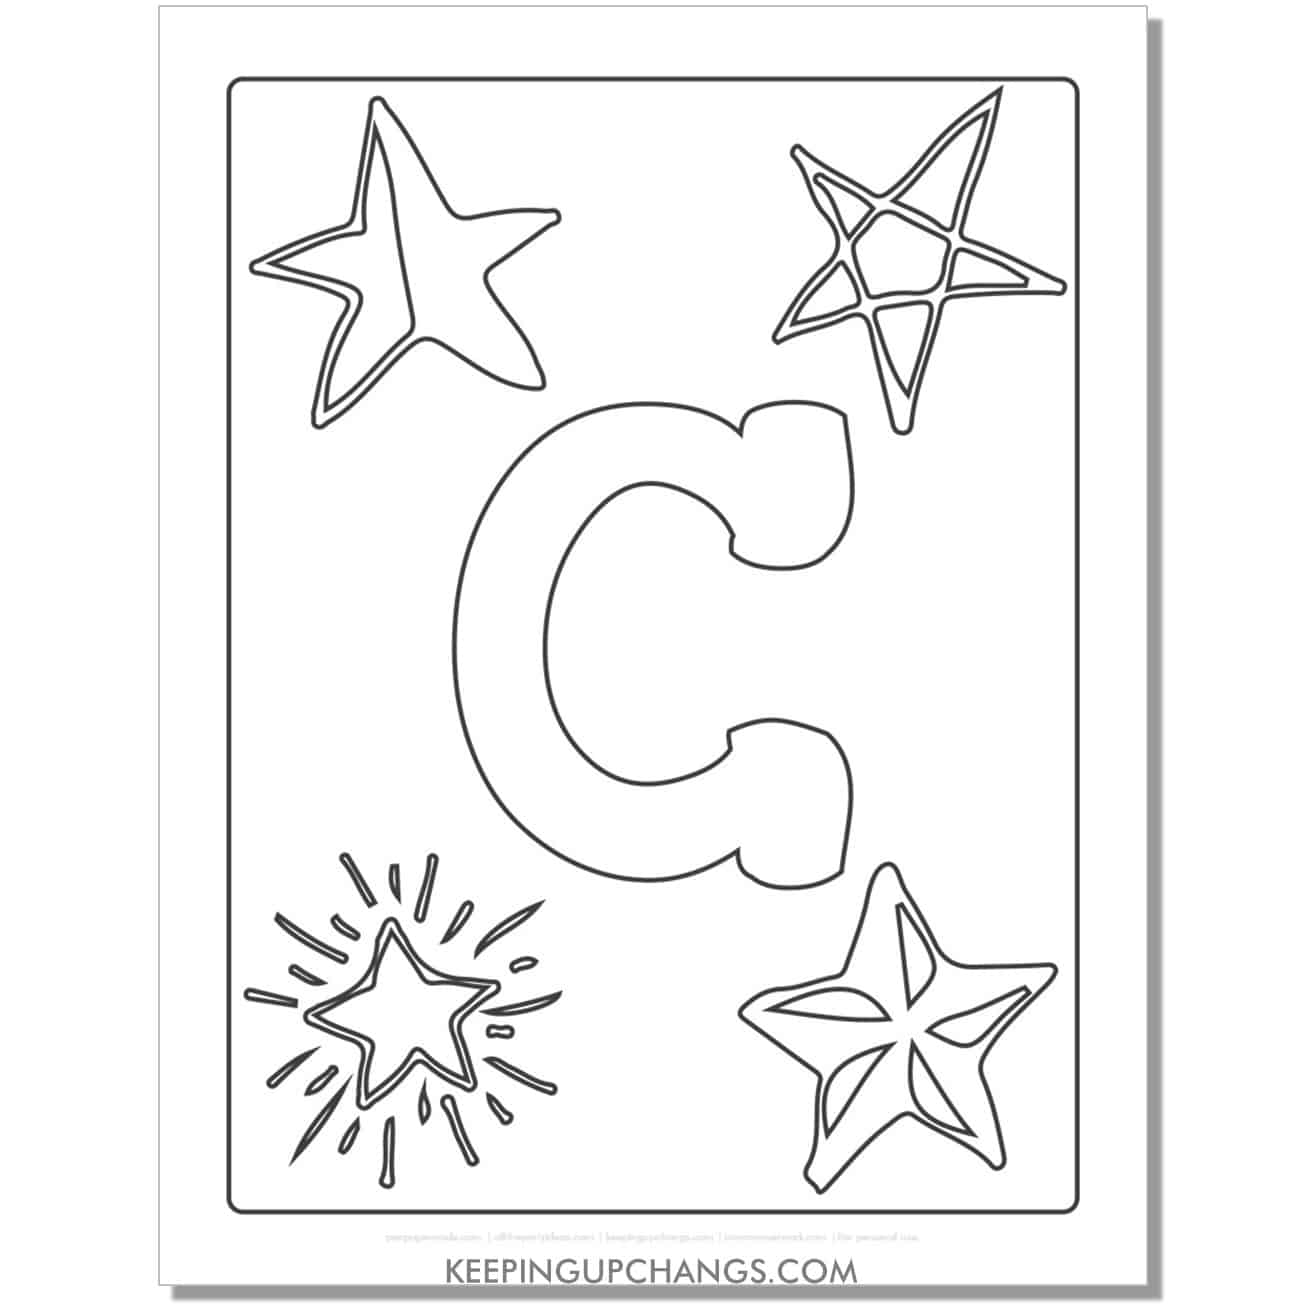 cool letter c to color with stars, space theme.